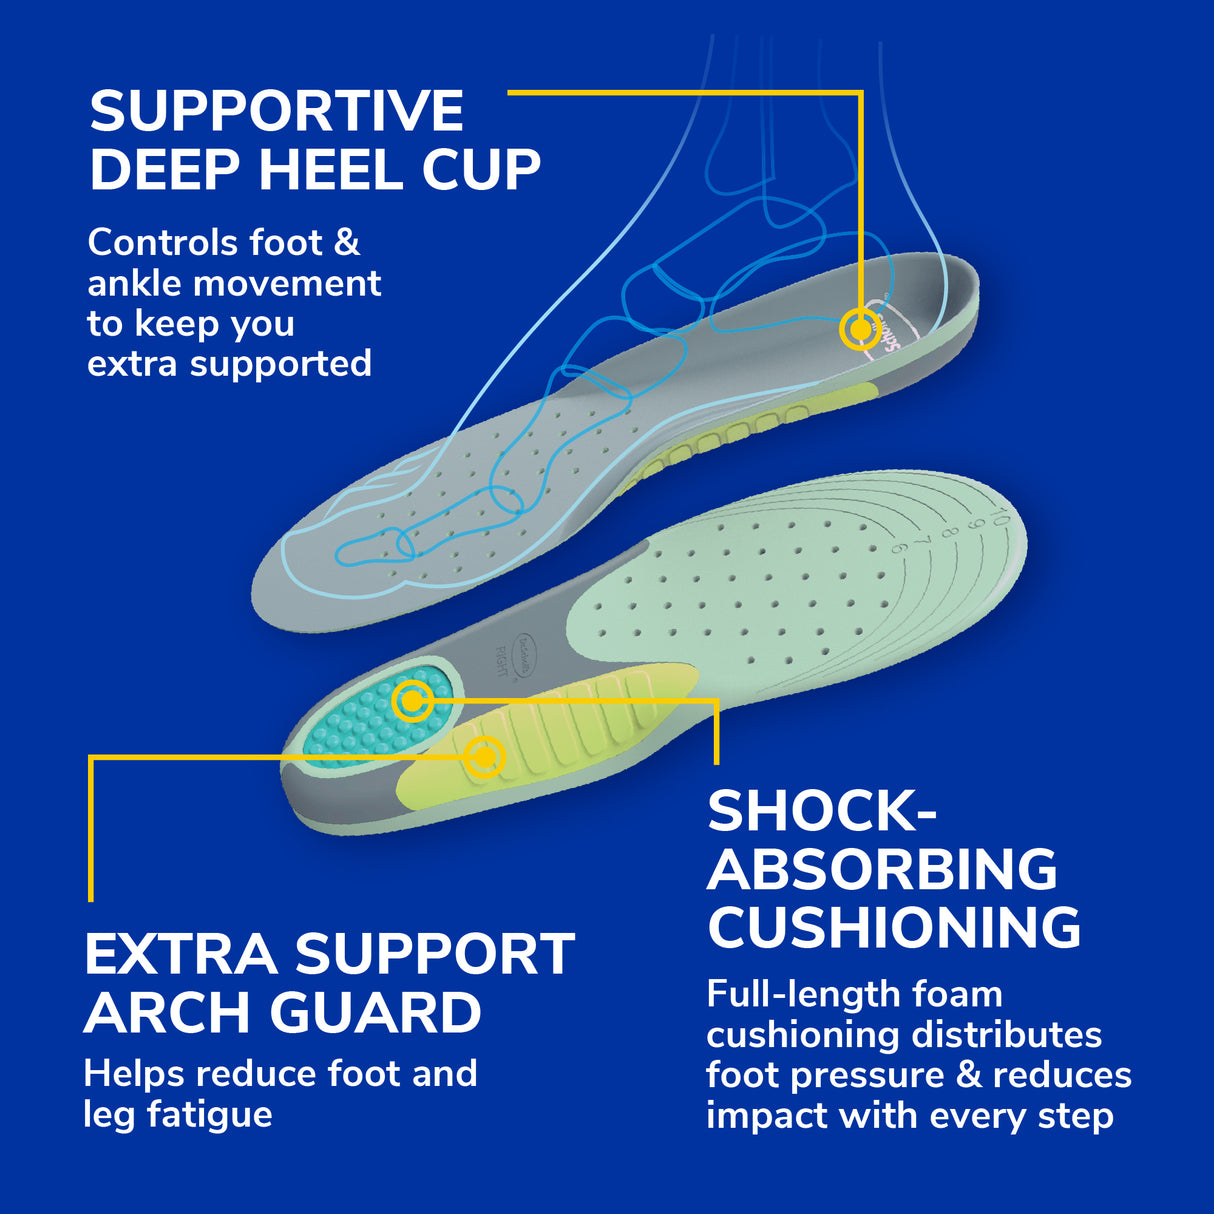 image of supportive deep heel cup extra support arch guard shock absorbing cushioning